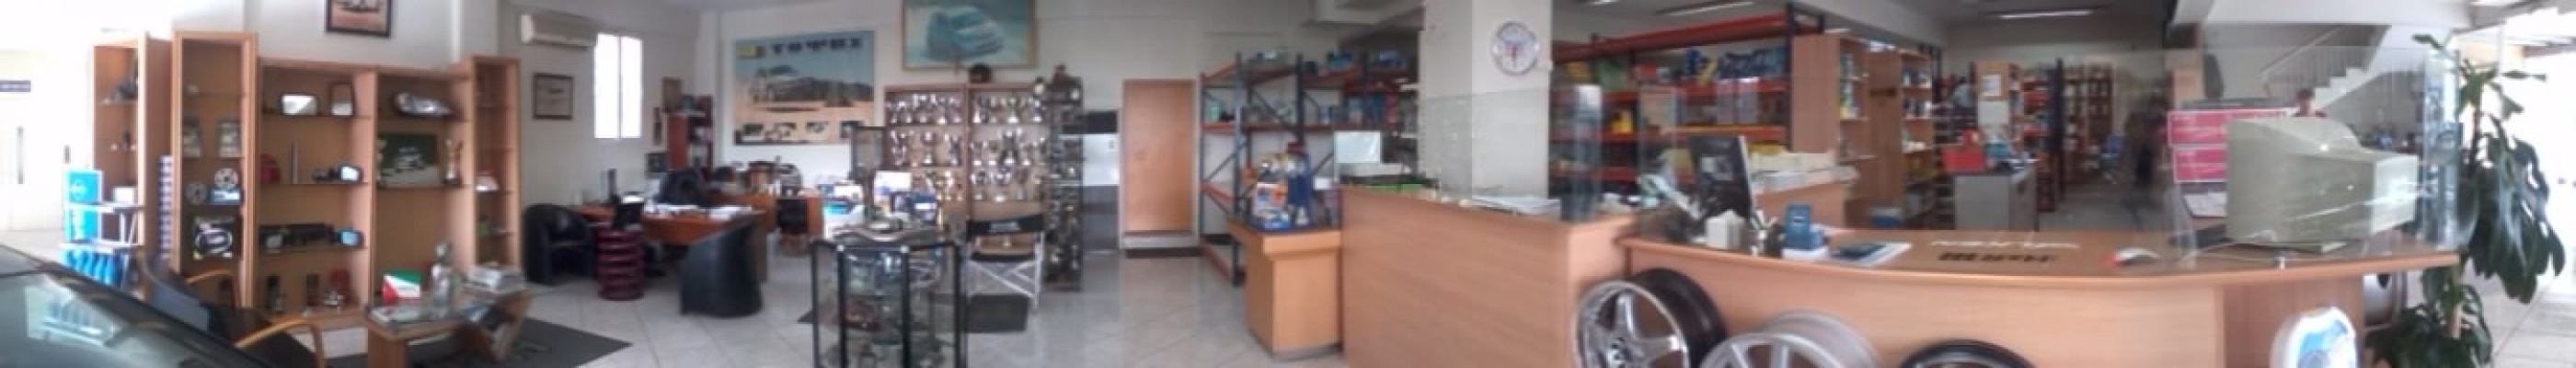 Store topsis 7